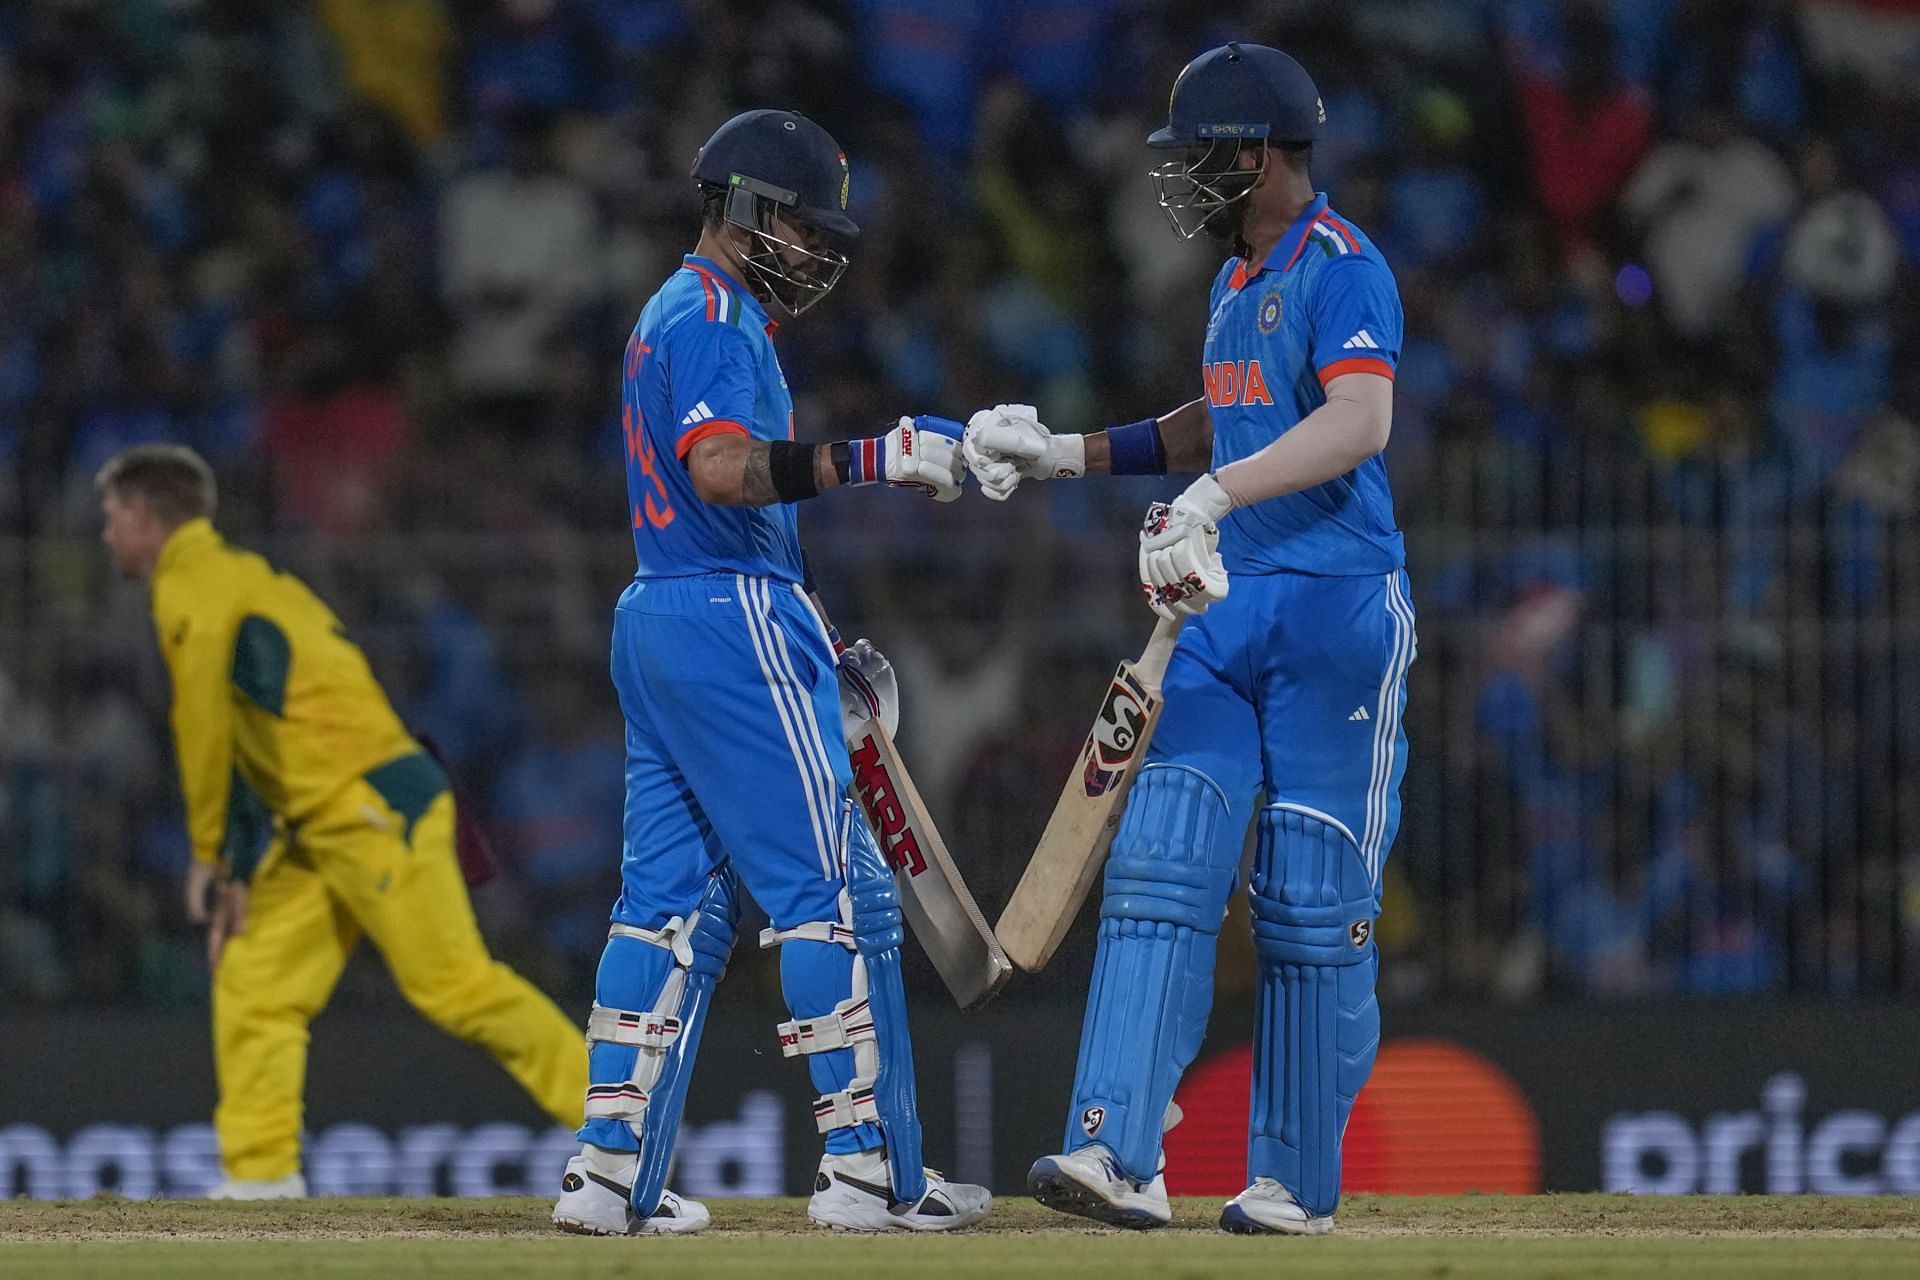 India were boosted by a mammoth partnership between KL Rahul and Virat Kohli